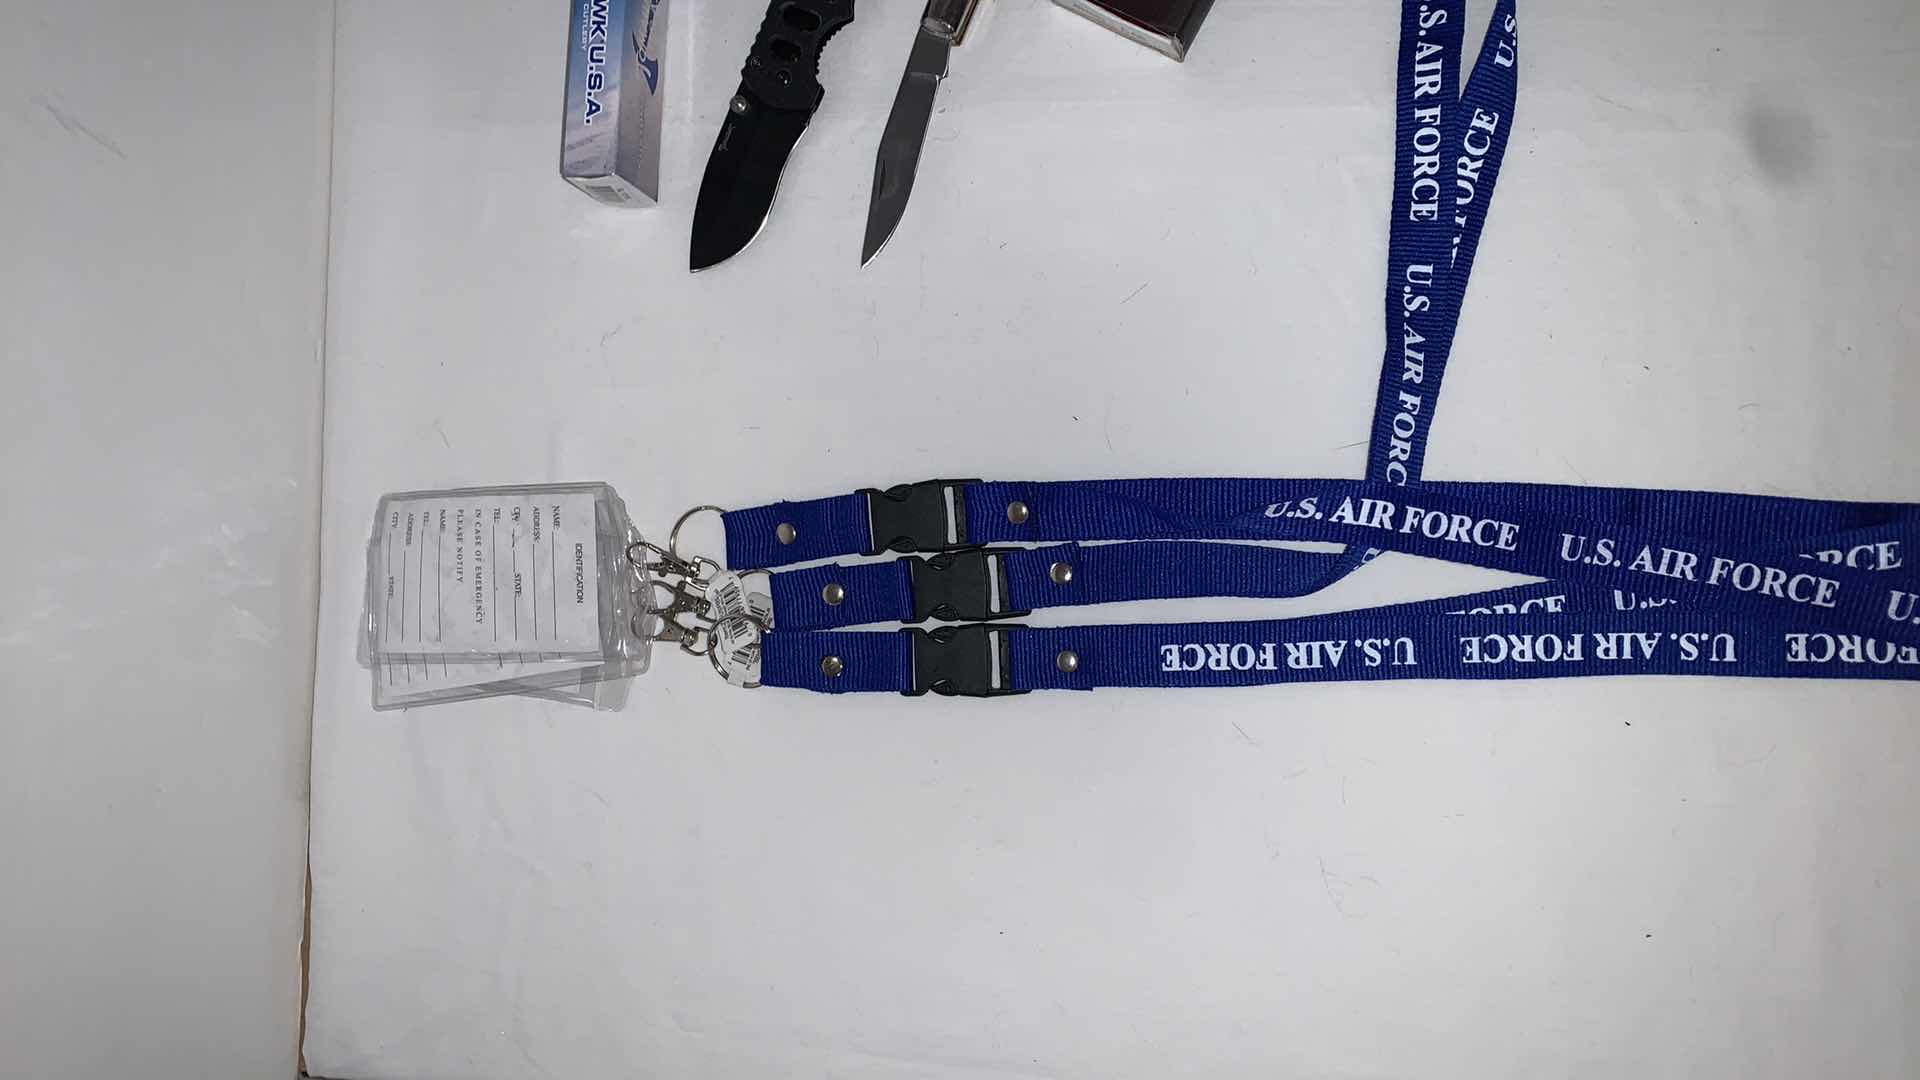 Photo 2 of SET OF U.S. AIR FORCE LANYARDS WITH POCKET TOOLS, TOMAHAWK KNIFE, FOLDING KNIFE, AND CAT EYE MELEE PROTECTION